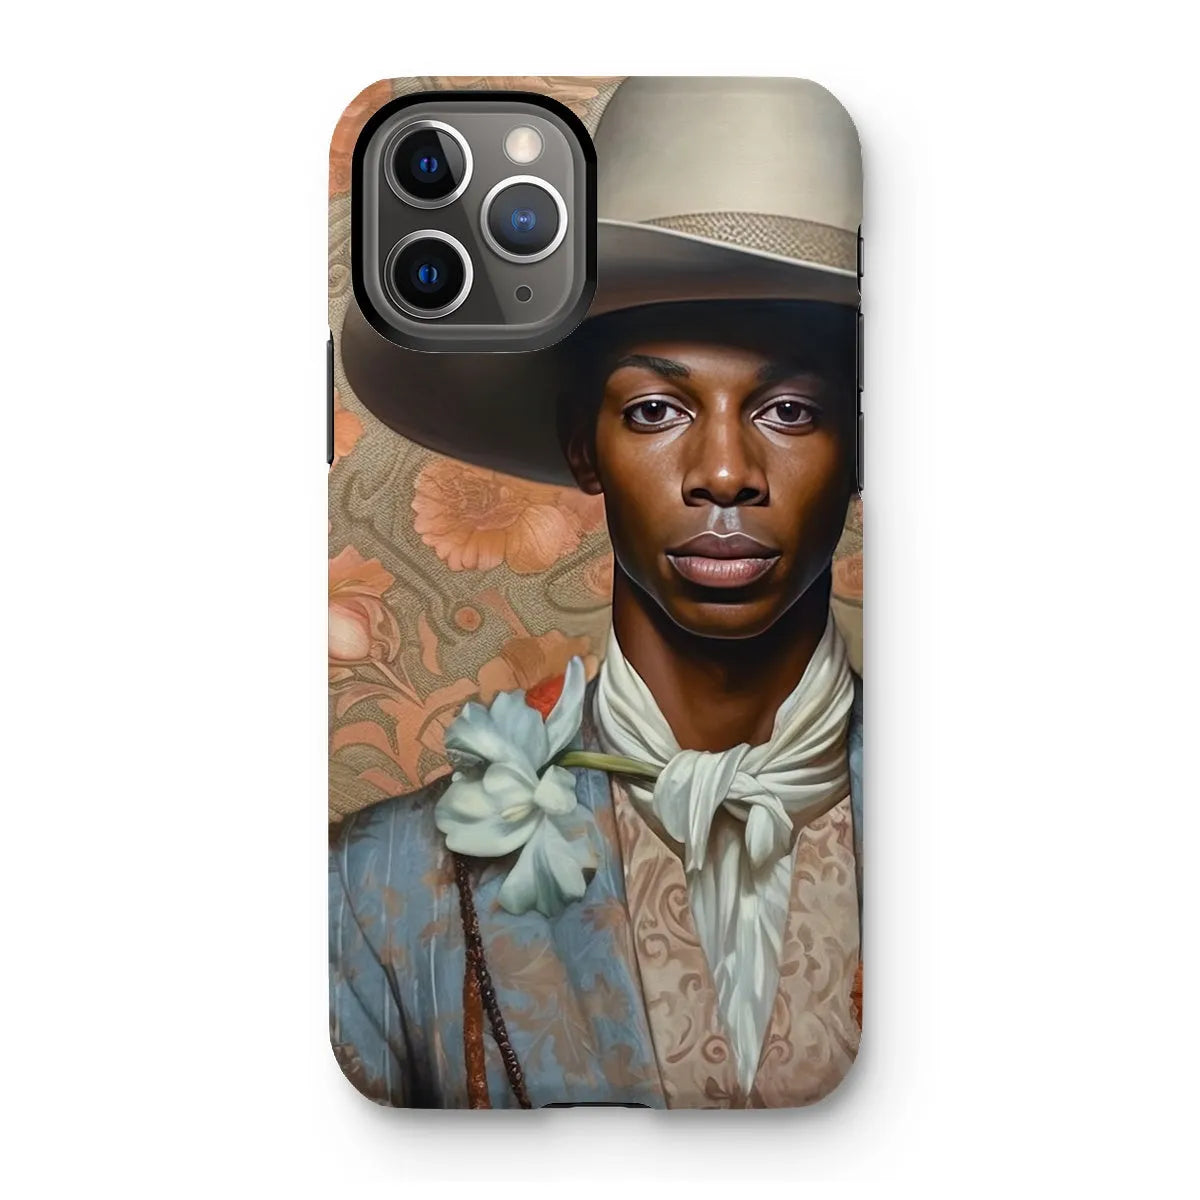 Apollo The Gay Cowboy - Gay Aesthetic Art Phone Case - Iphone 11 Pro / Matte - Mobile Phone Cases - Aesthetic Art